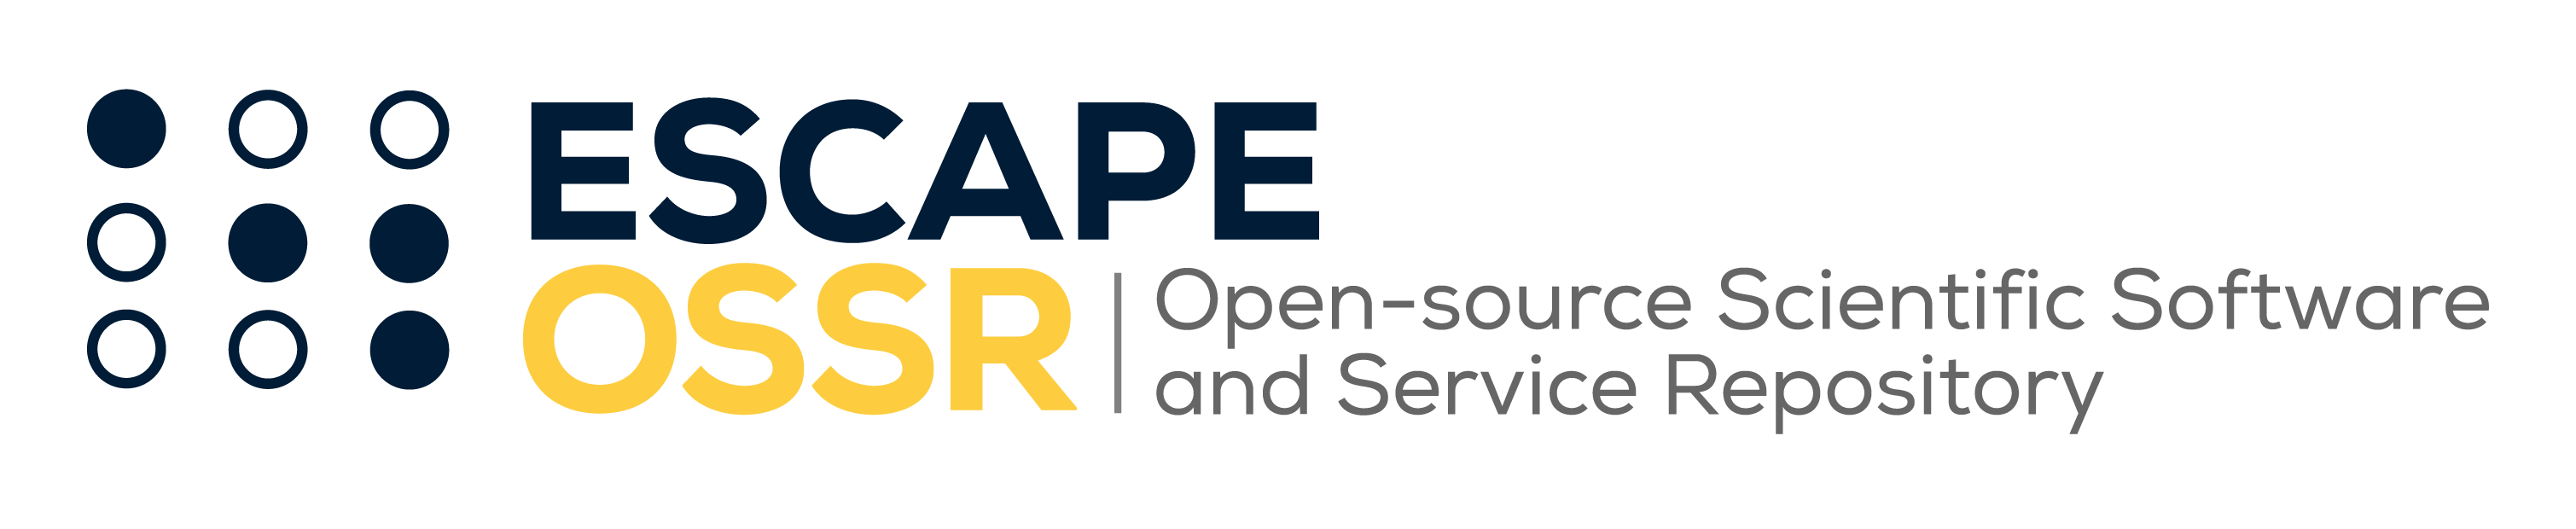 open source scientific software and service repository